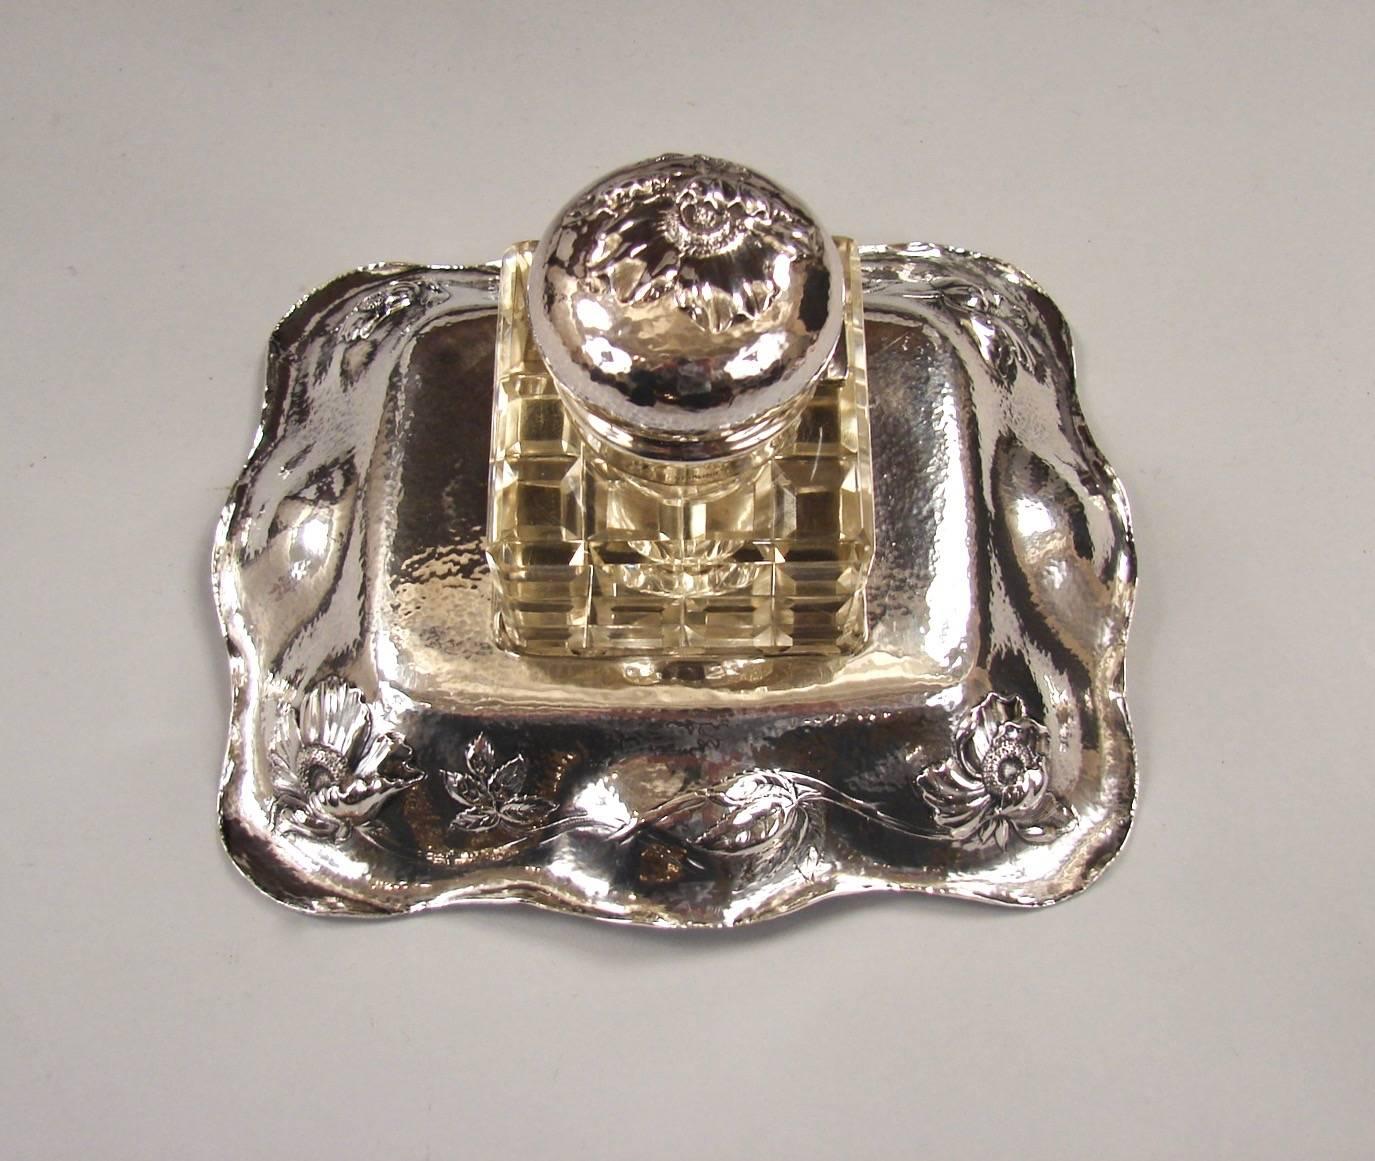 American Art Nouveau Sterling Silver Inkstand by Barbour Silver Company 1